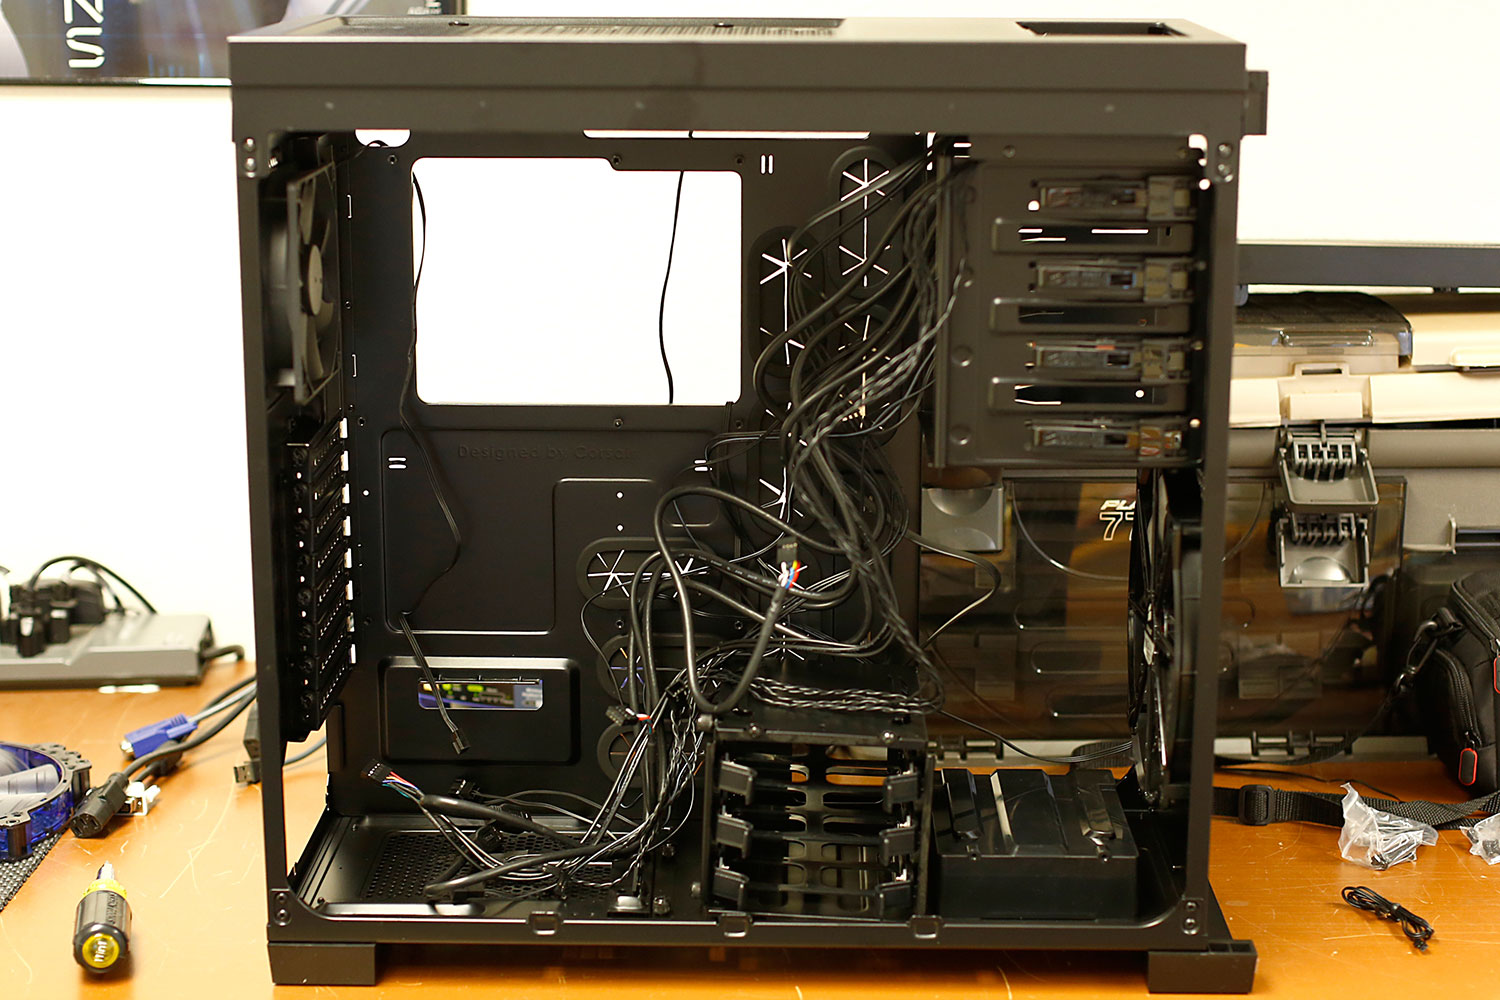 A look inside of the&nbsp;Corsair Obsidian Series 650 with the cover off prior to installing the components.